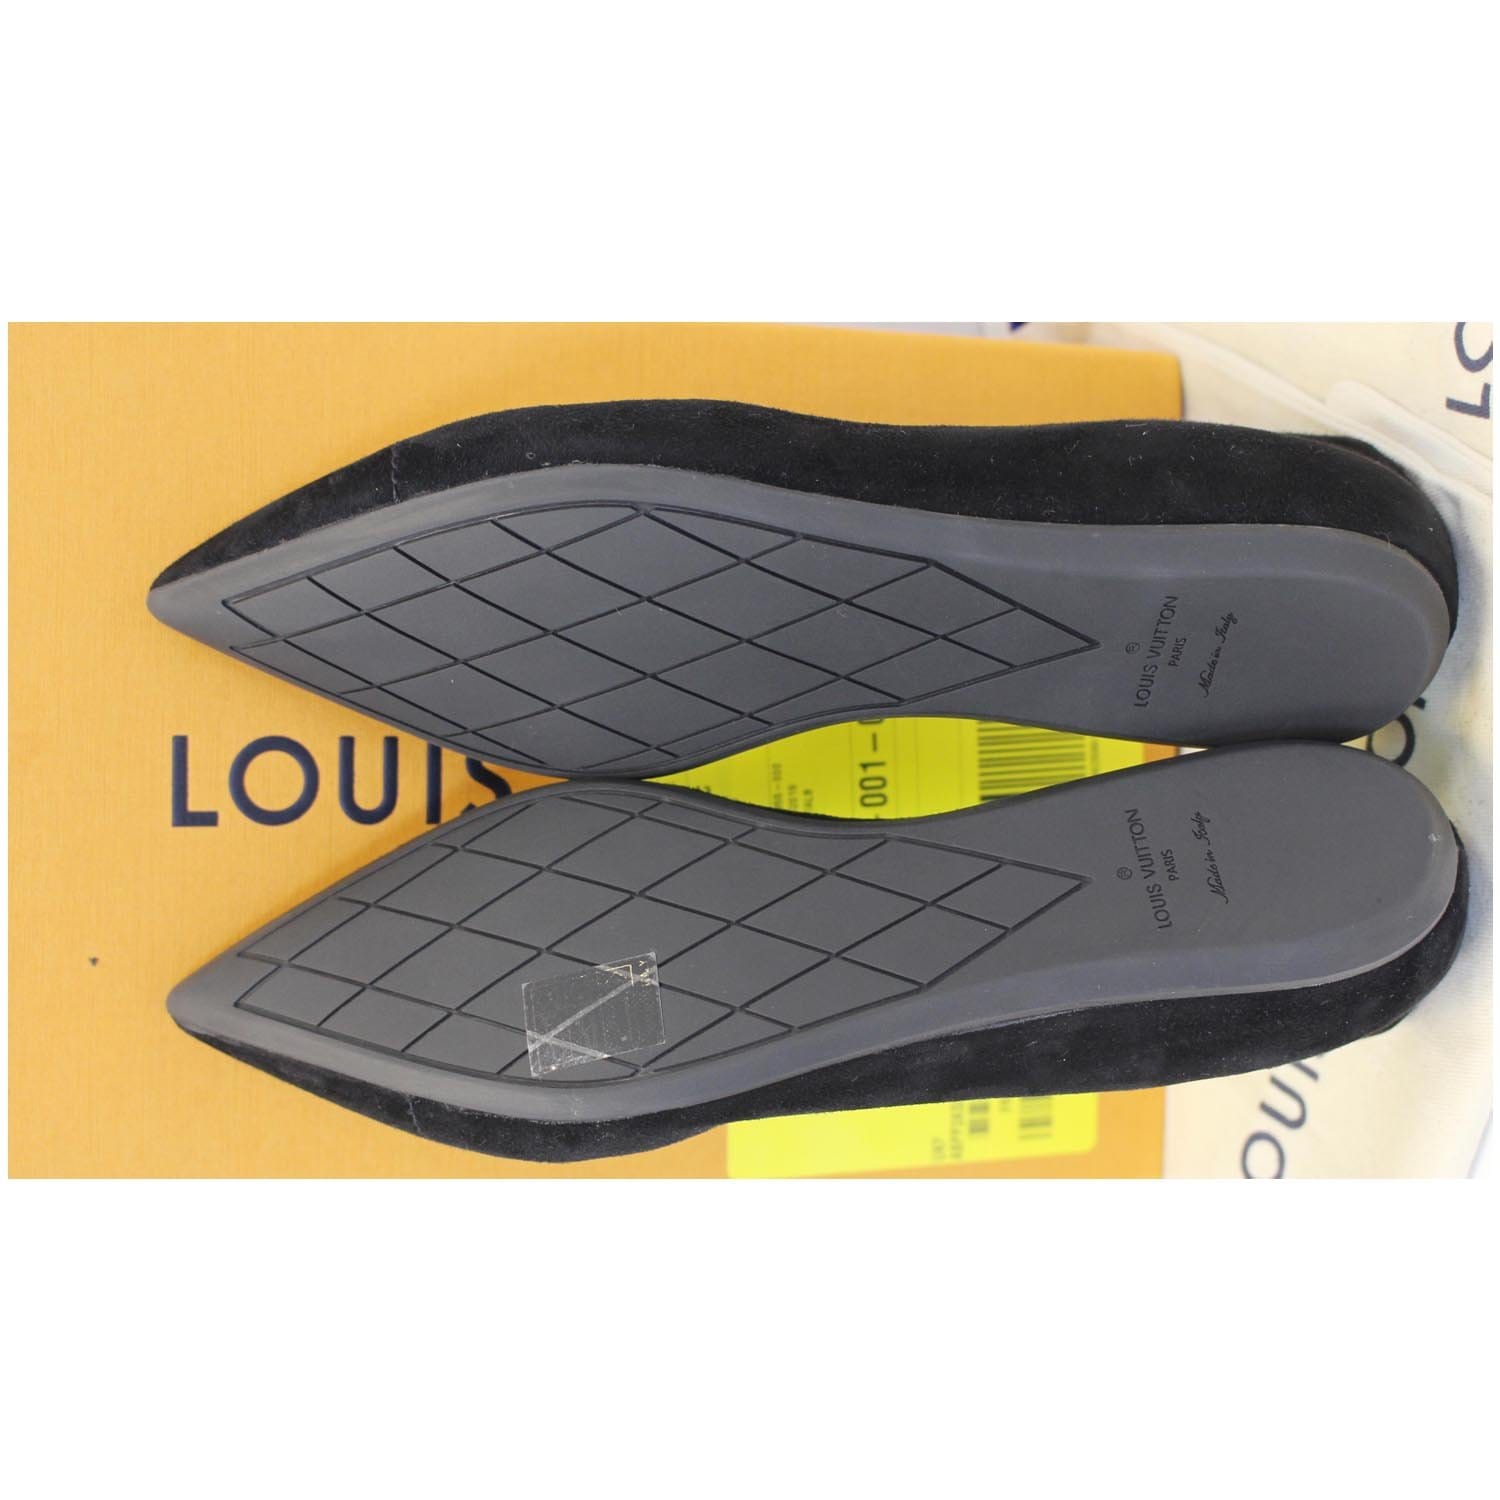 Academy leather flats Louis Vuitton Black size 37.5 EU in Leather - 33623900